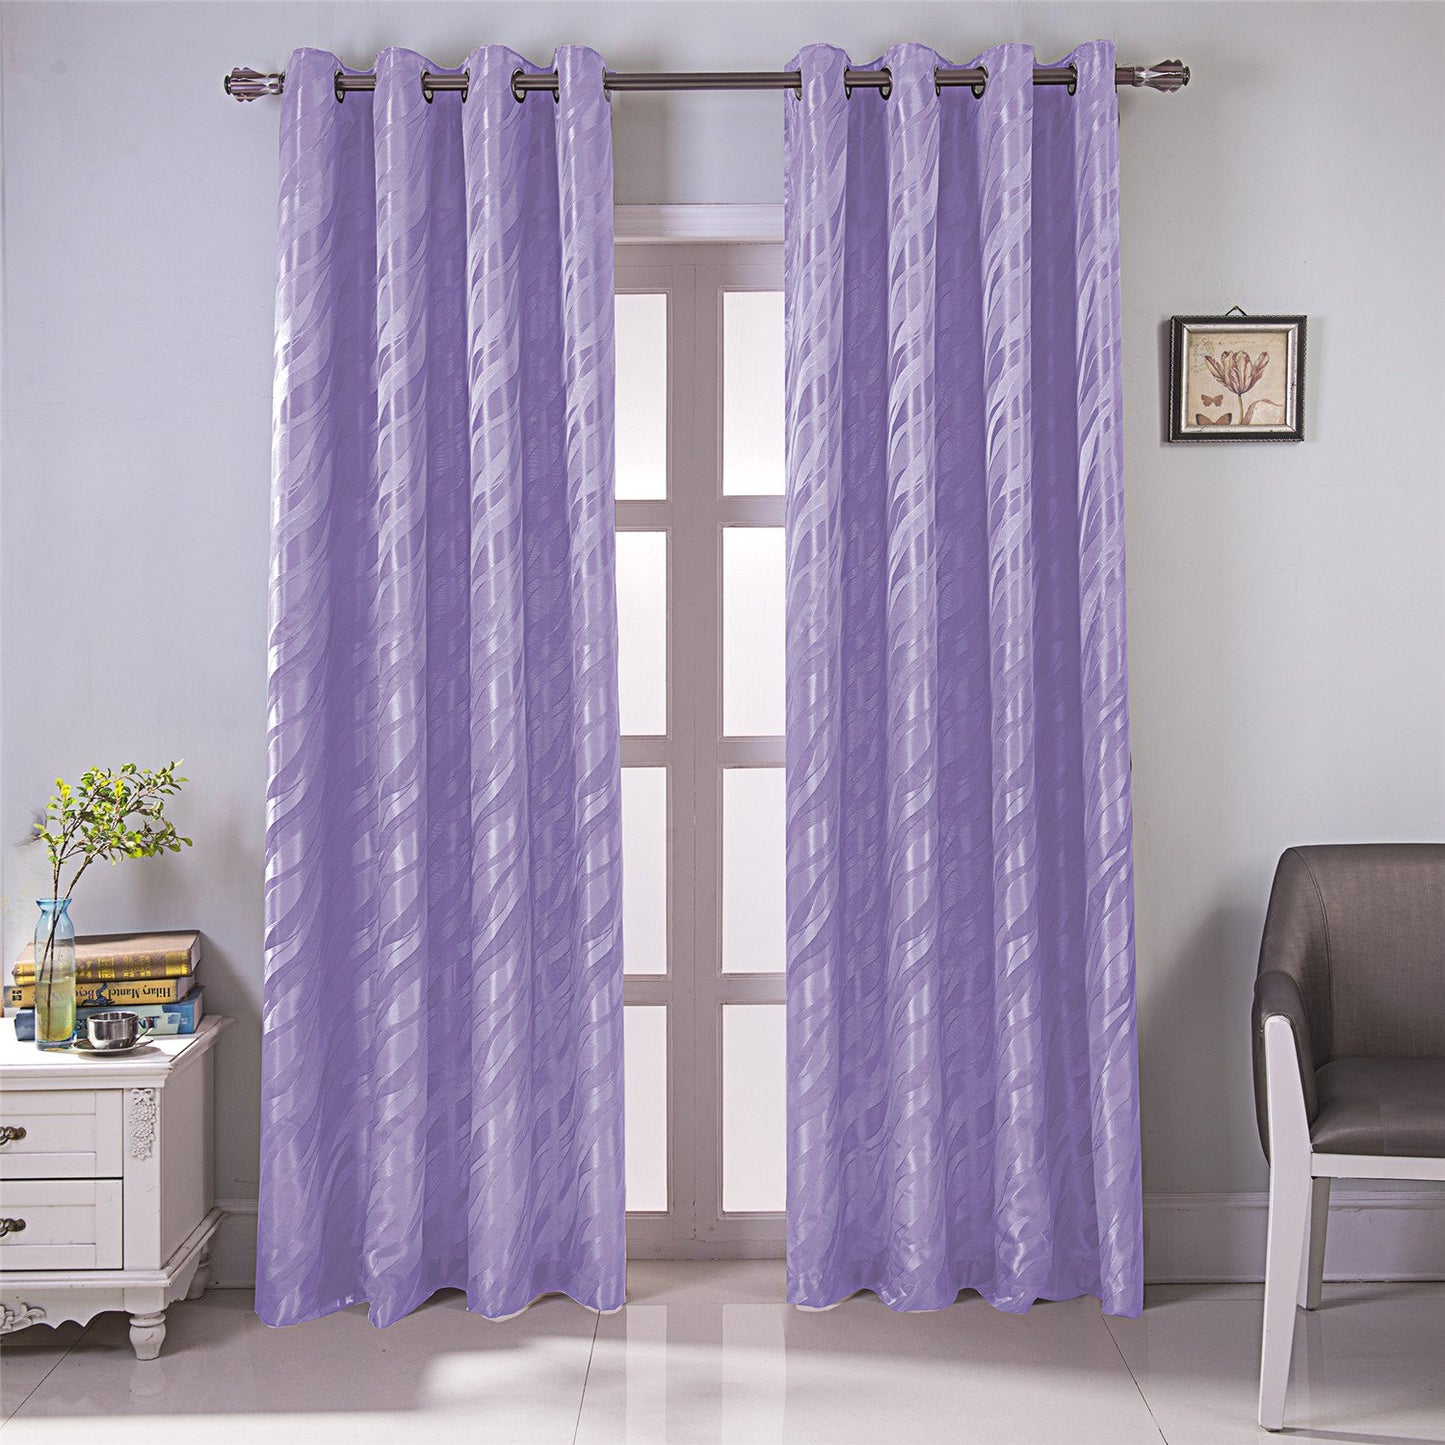 Gyrohomestore Cheap Solid Blackout Thermal Indoor/Outdoor Grommet Curtain